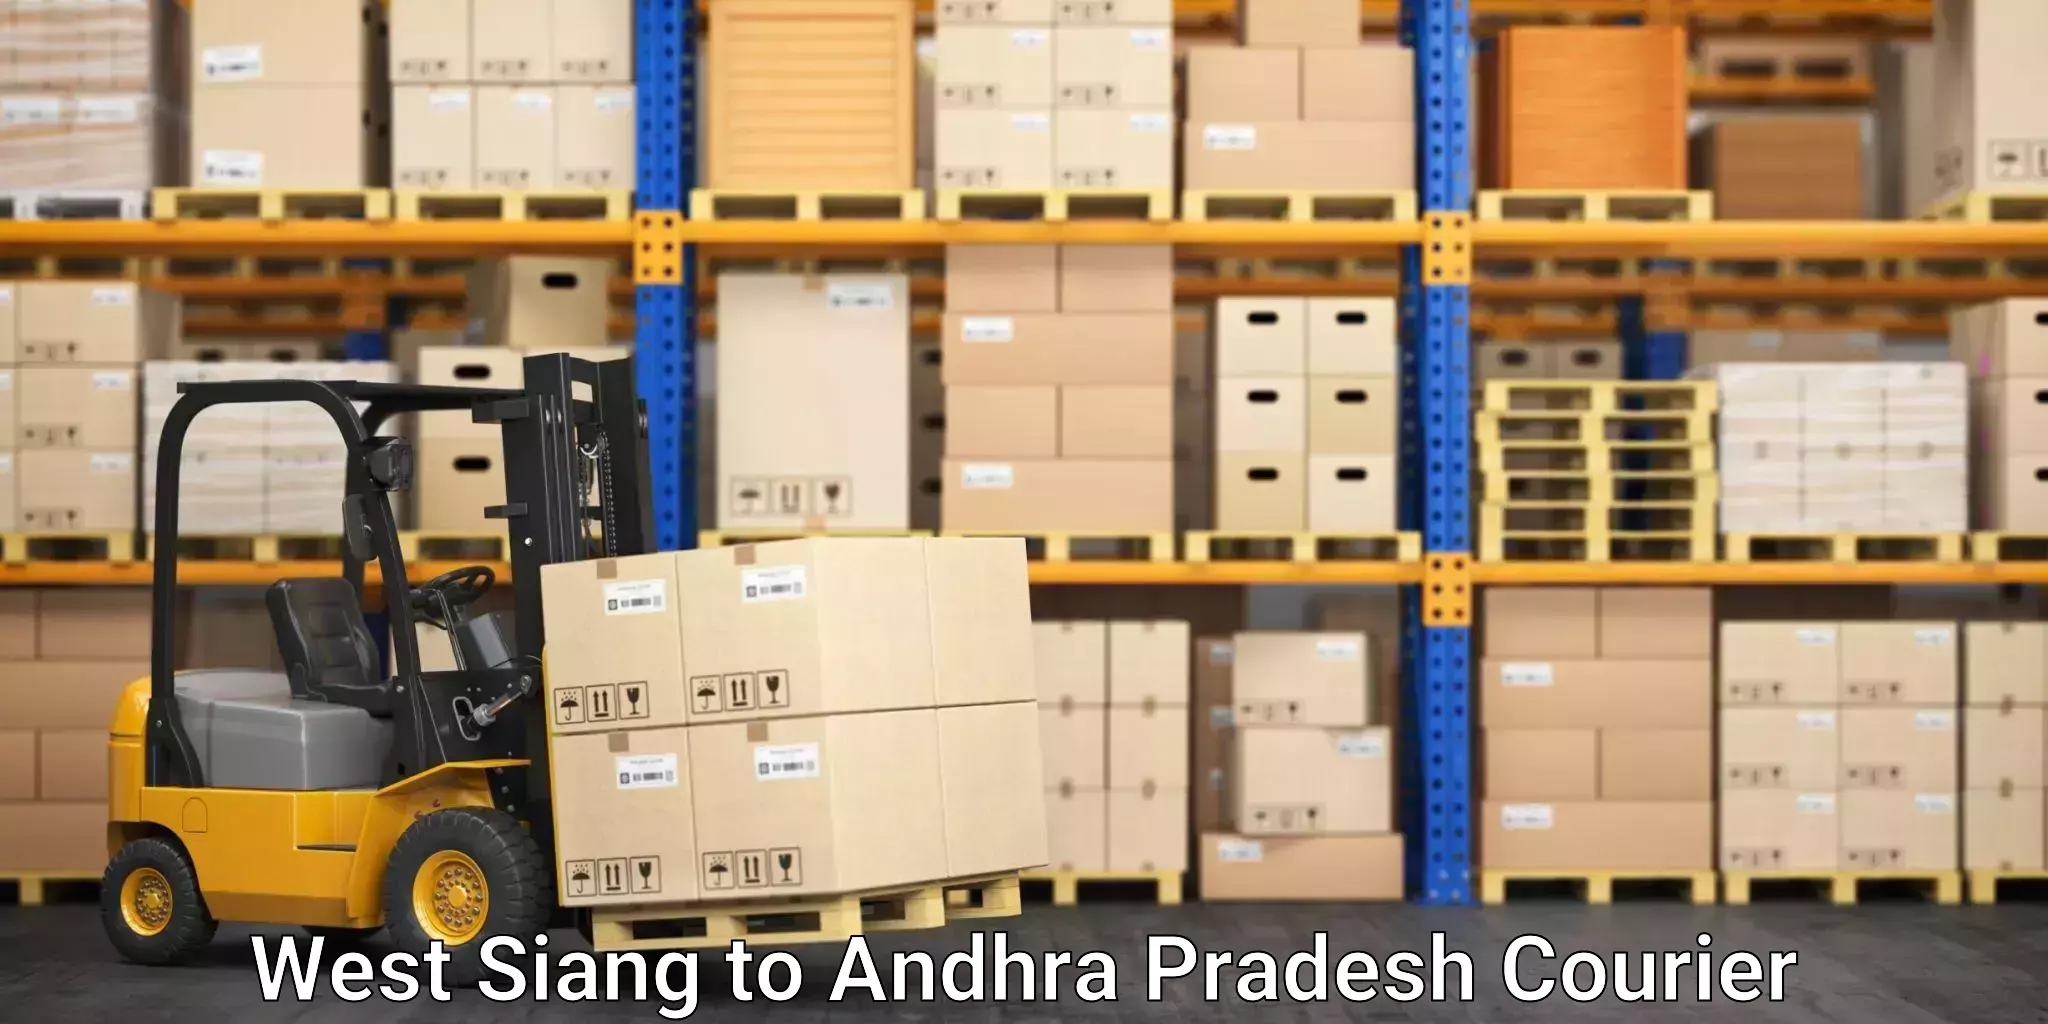 Efficient parcel service West Siang to Andhra Pradesh